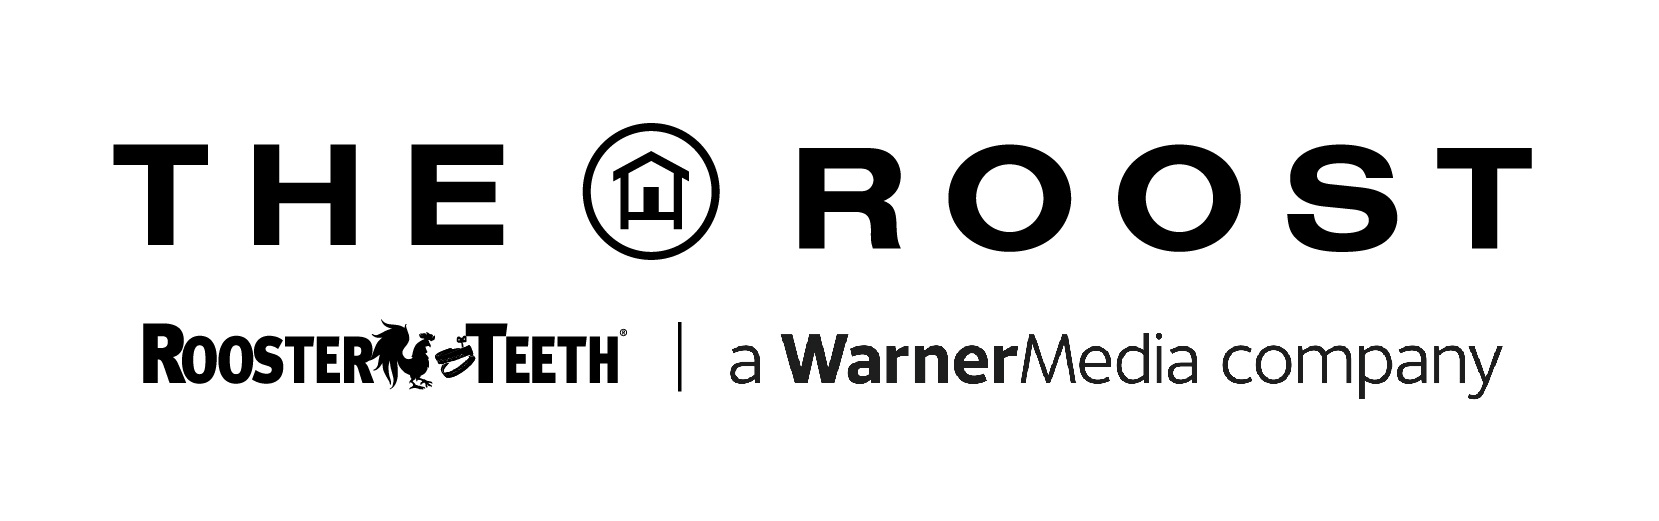 The Roost (podcast division of WarnerMedia)